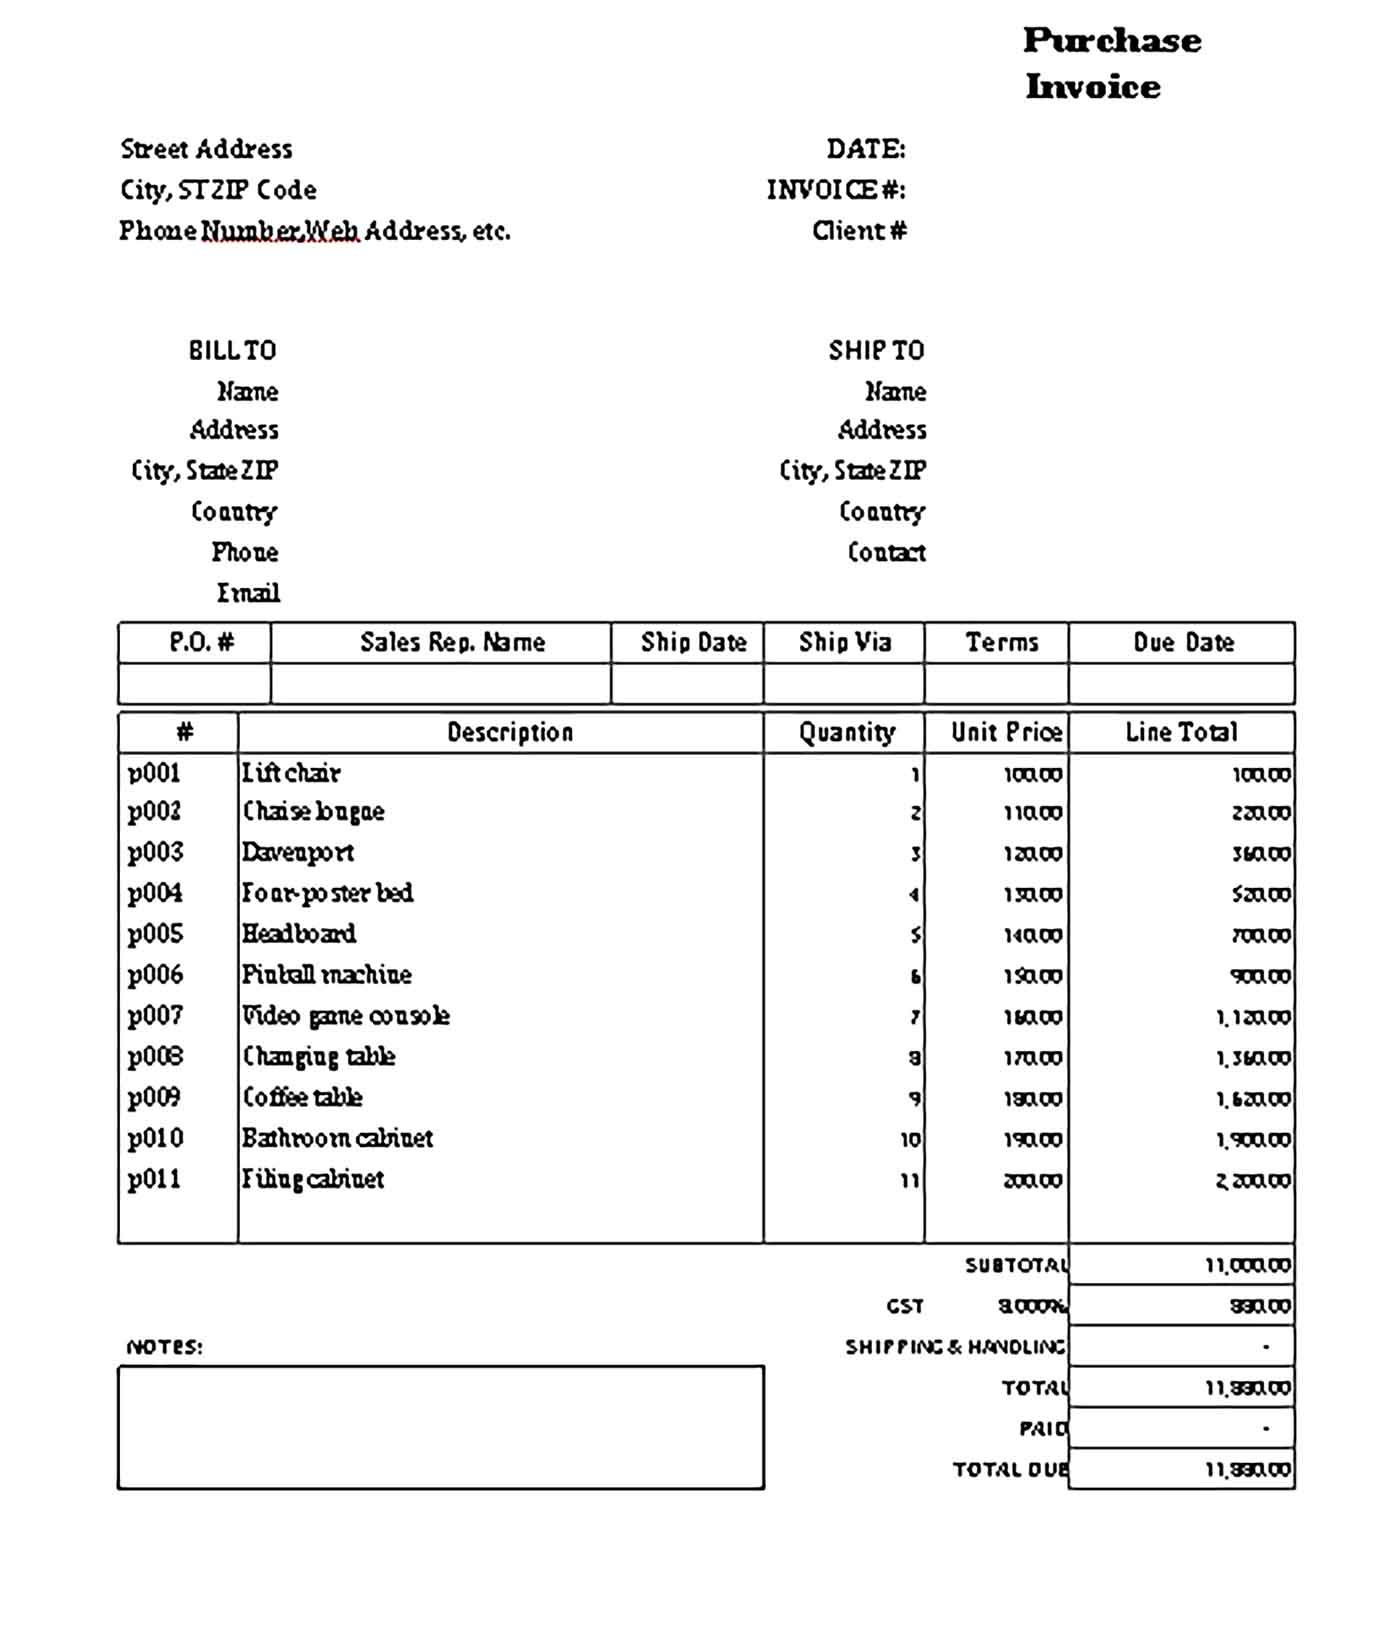 Sample Templates Purchase Invoice for Furniture